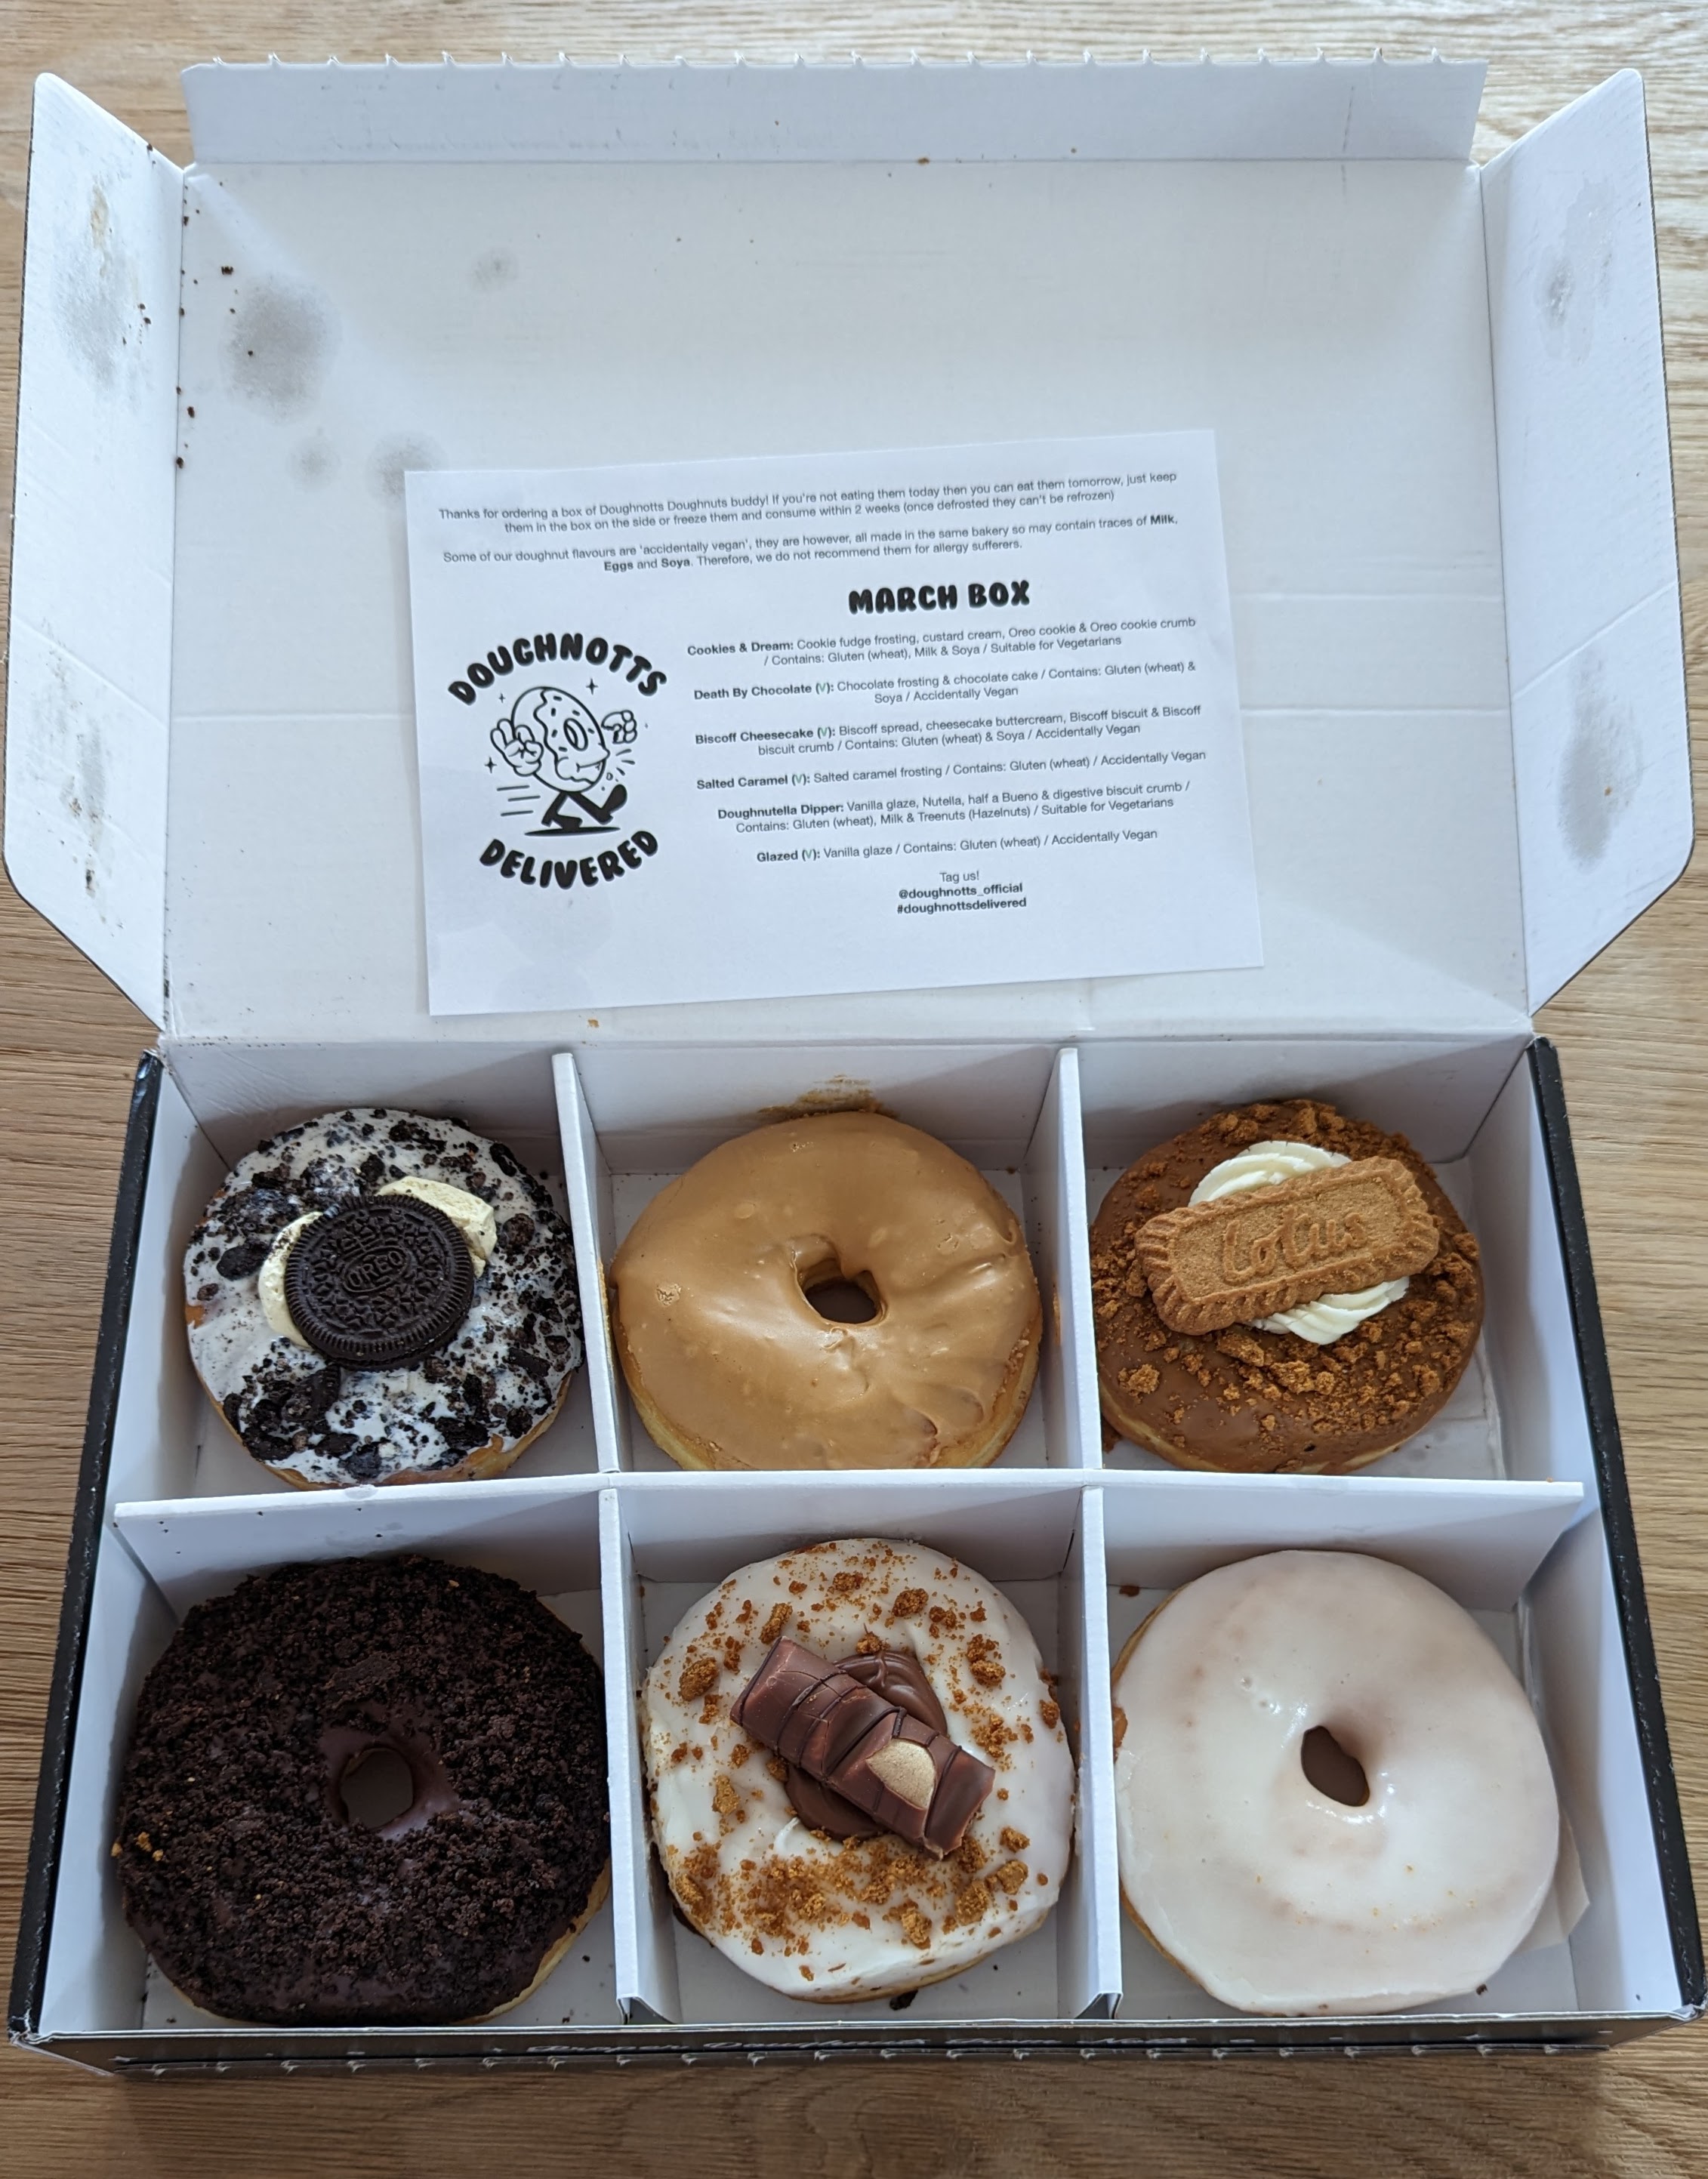 A box of six DoughNotts doughnuts - Cookies and Cream, Salted Caramel, Biscoff Cheesecake, Death By Chocolate, Doughnutella Dipper, Glazed